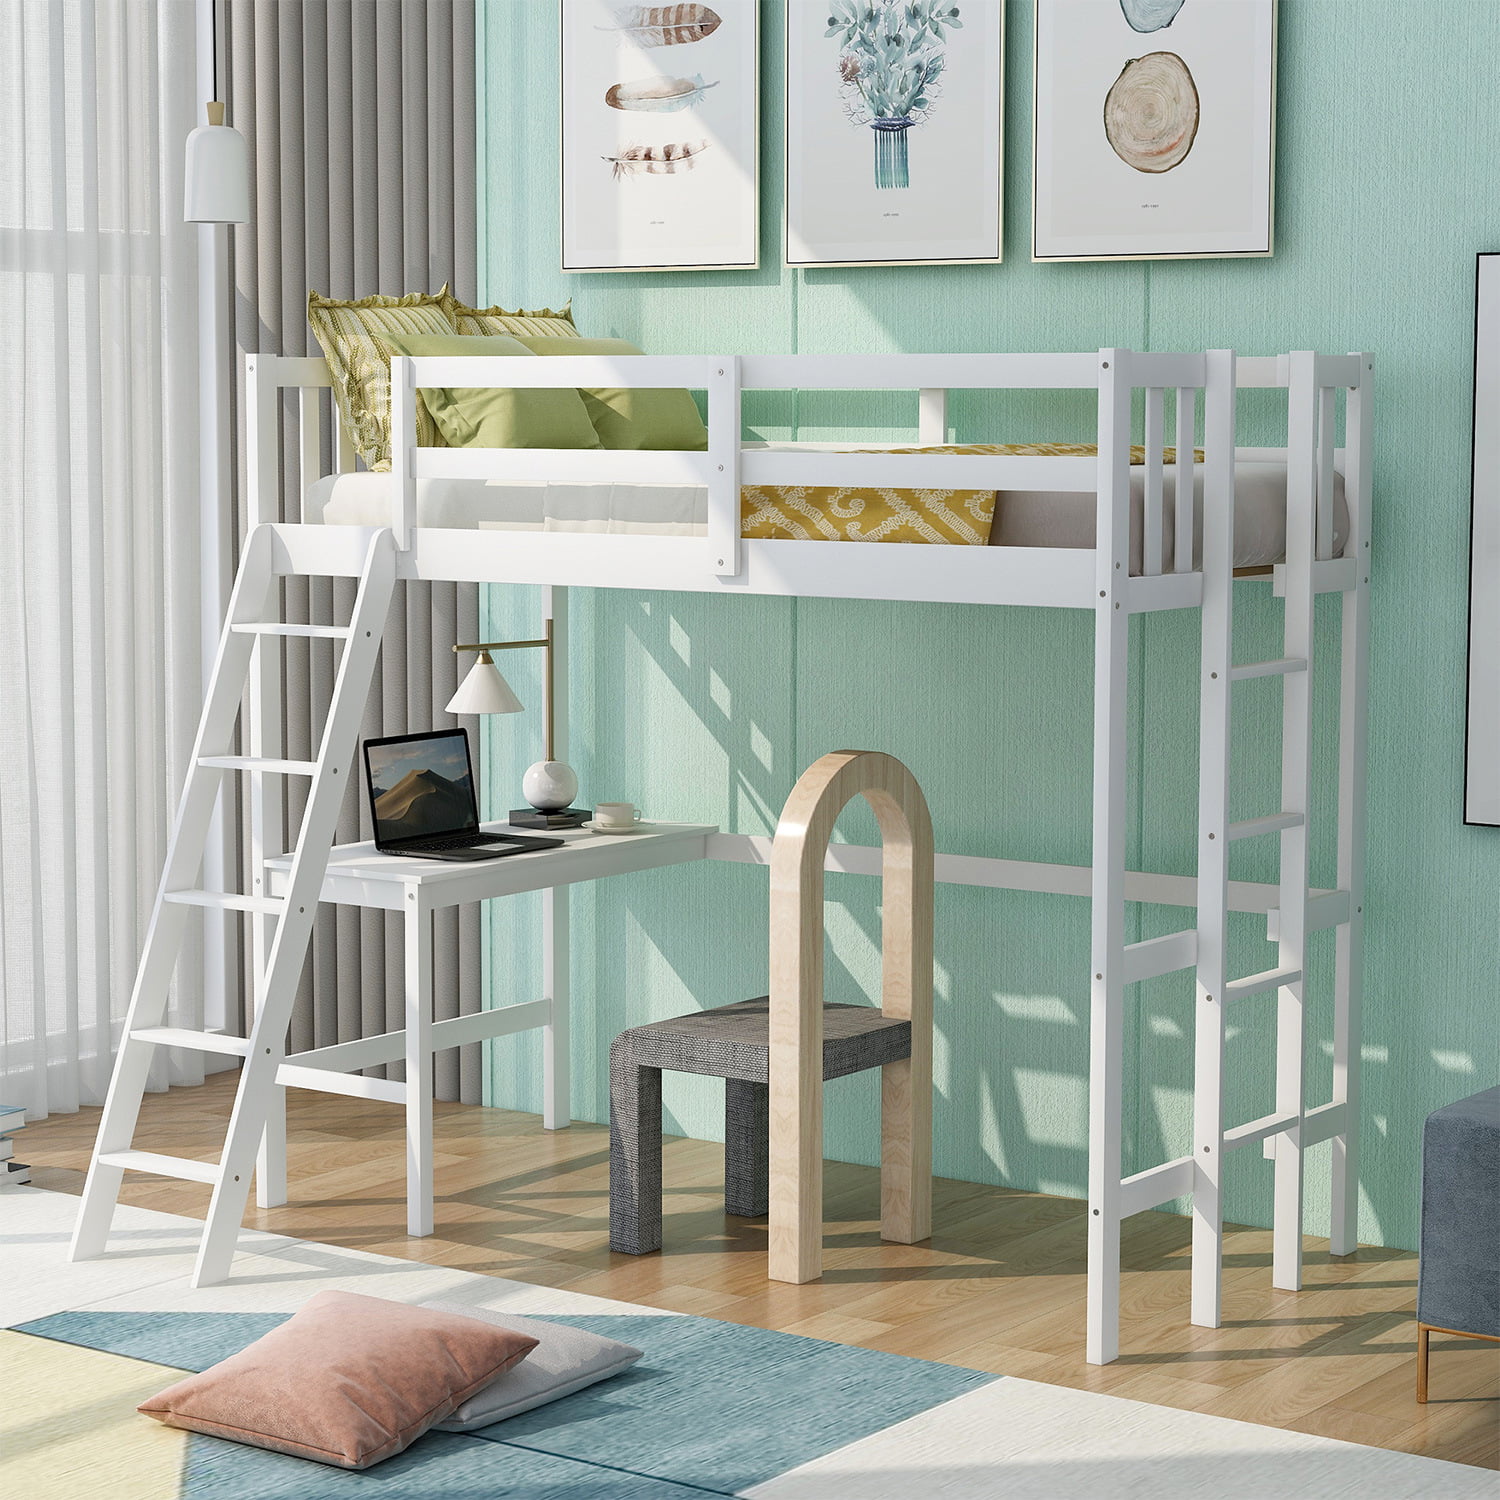 Loft Bed With Desk And Two Ladders, Ladder Dimensions For Bunk Bed